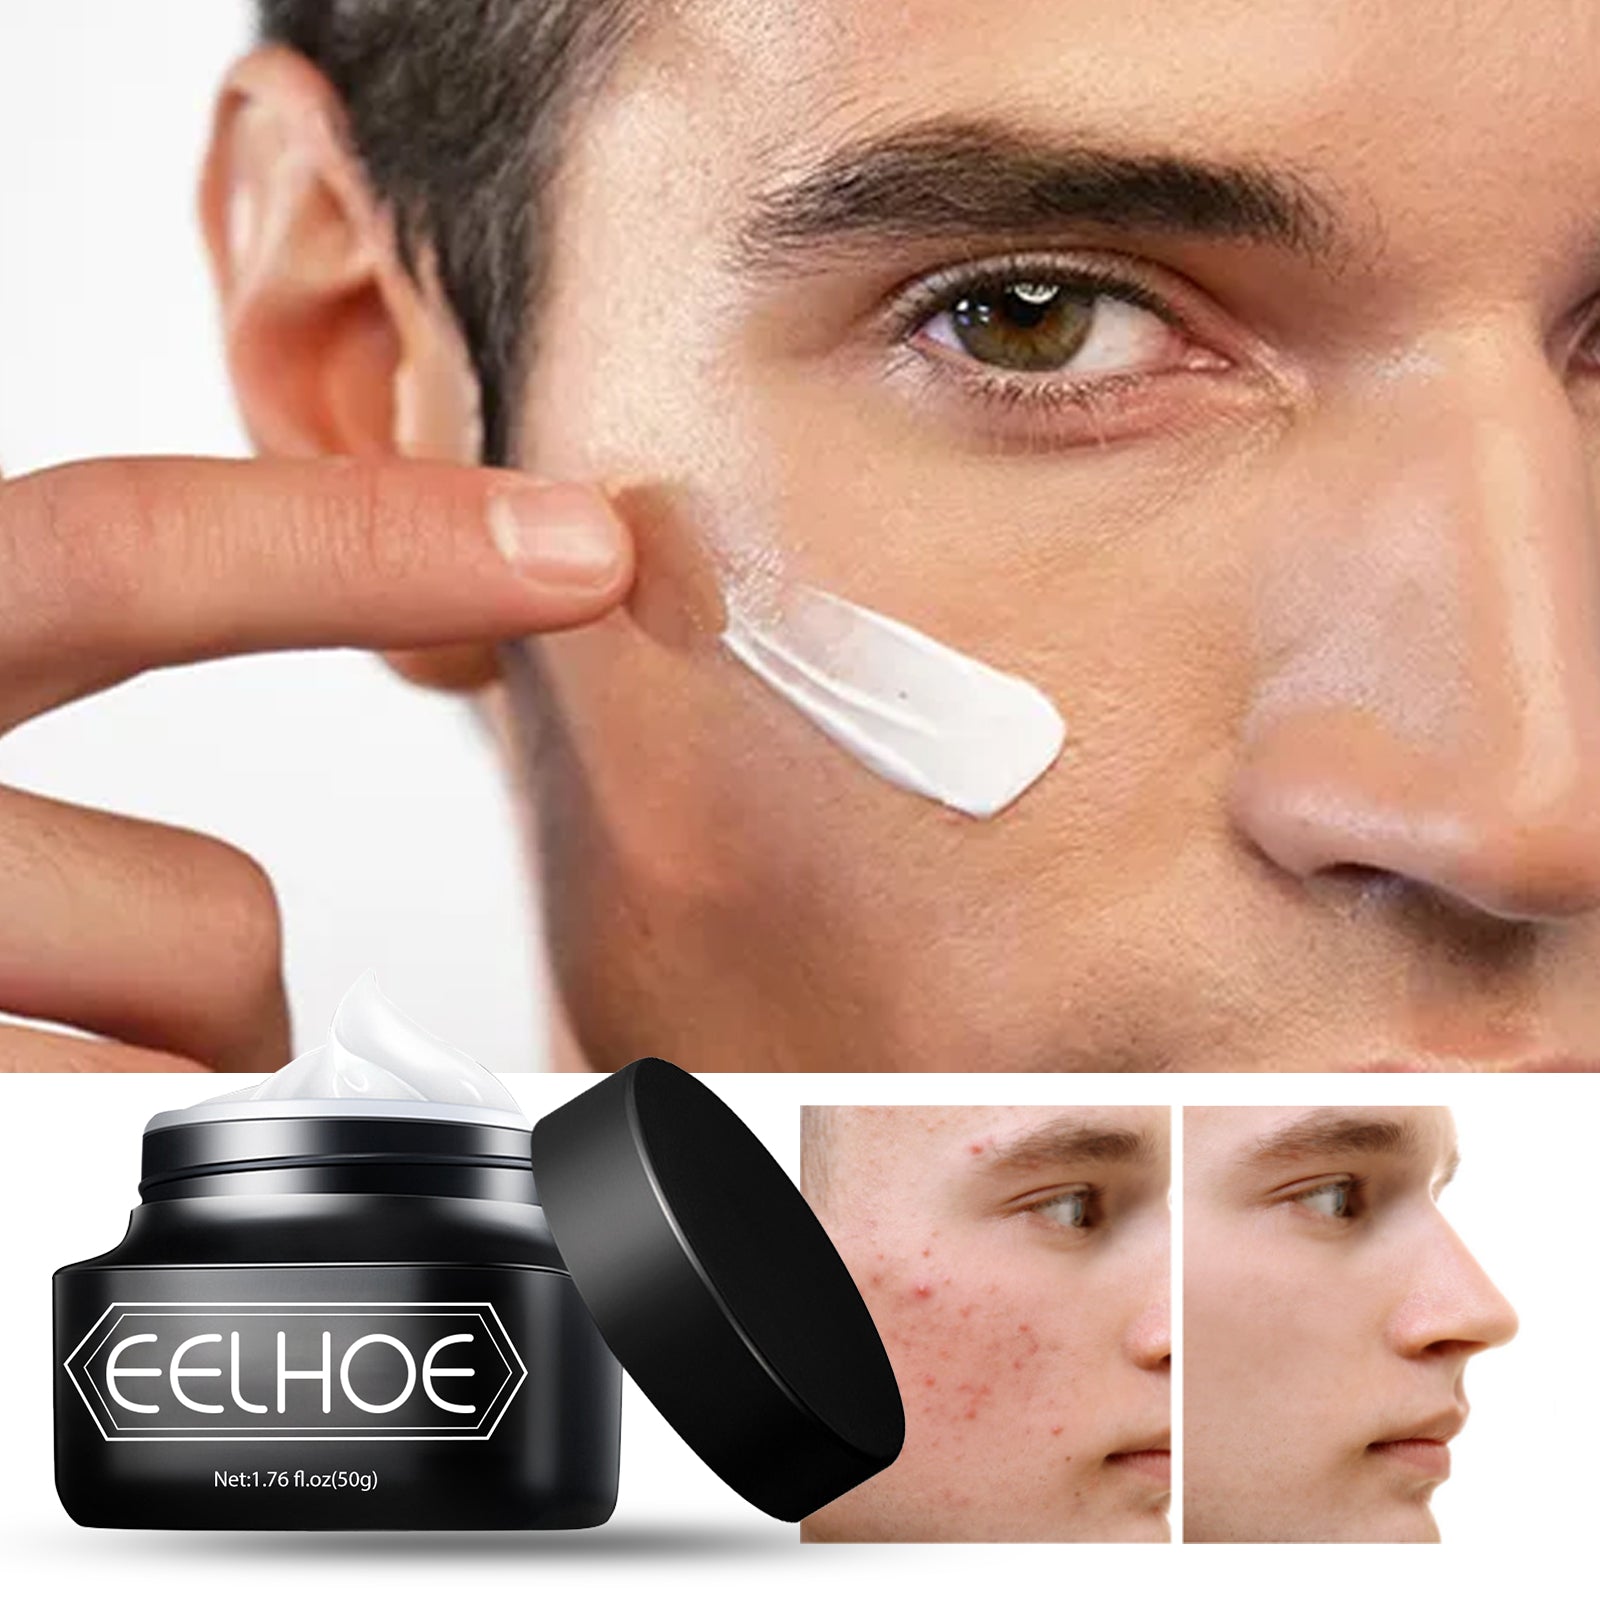 EELHOE Men's No-makeup Cream Refreshing and non-greasy concealer conceals acne marks and brightens skin tone invisible pores lazy cream